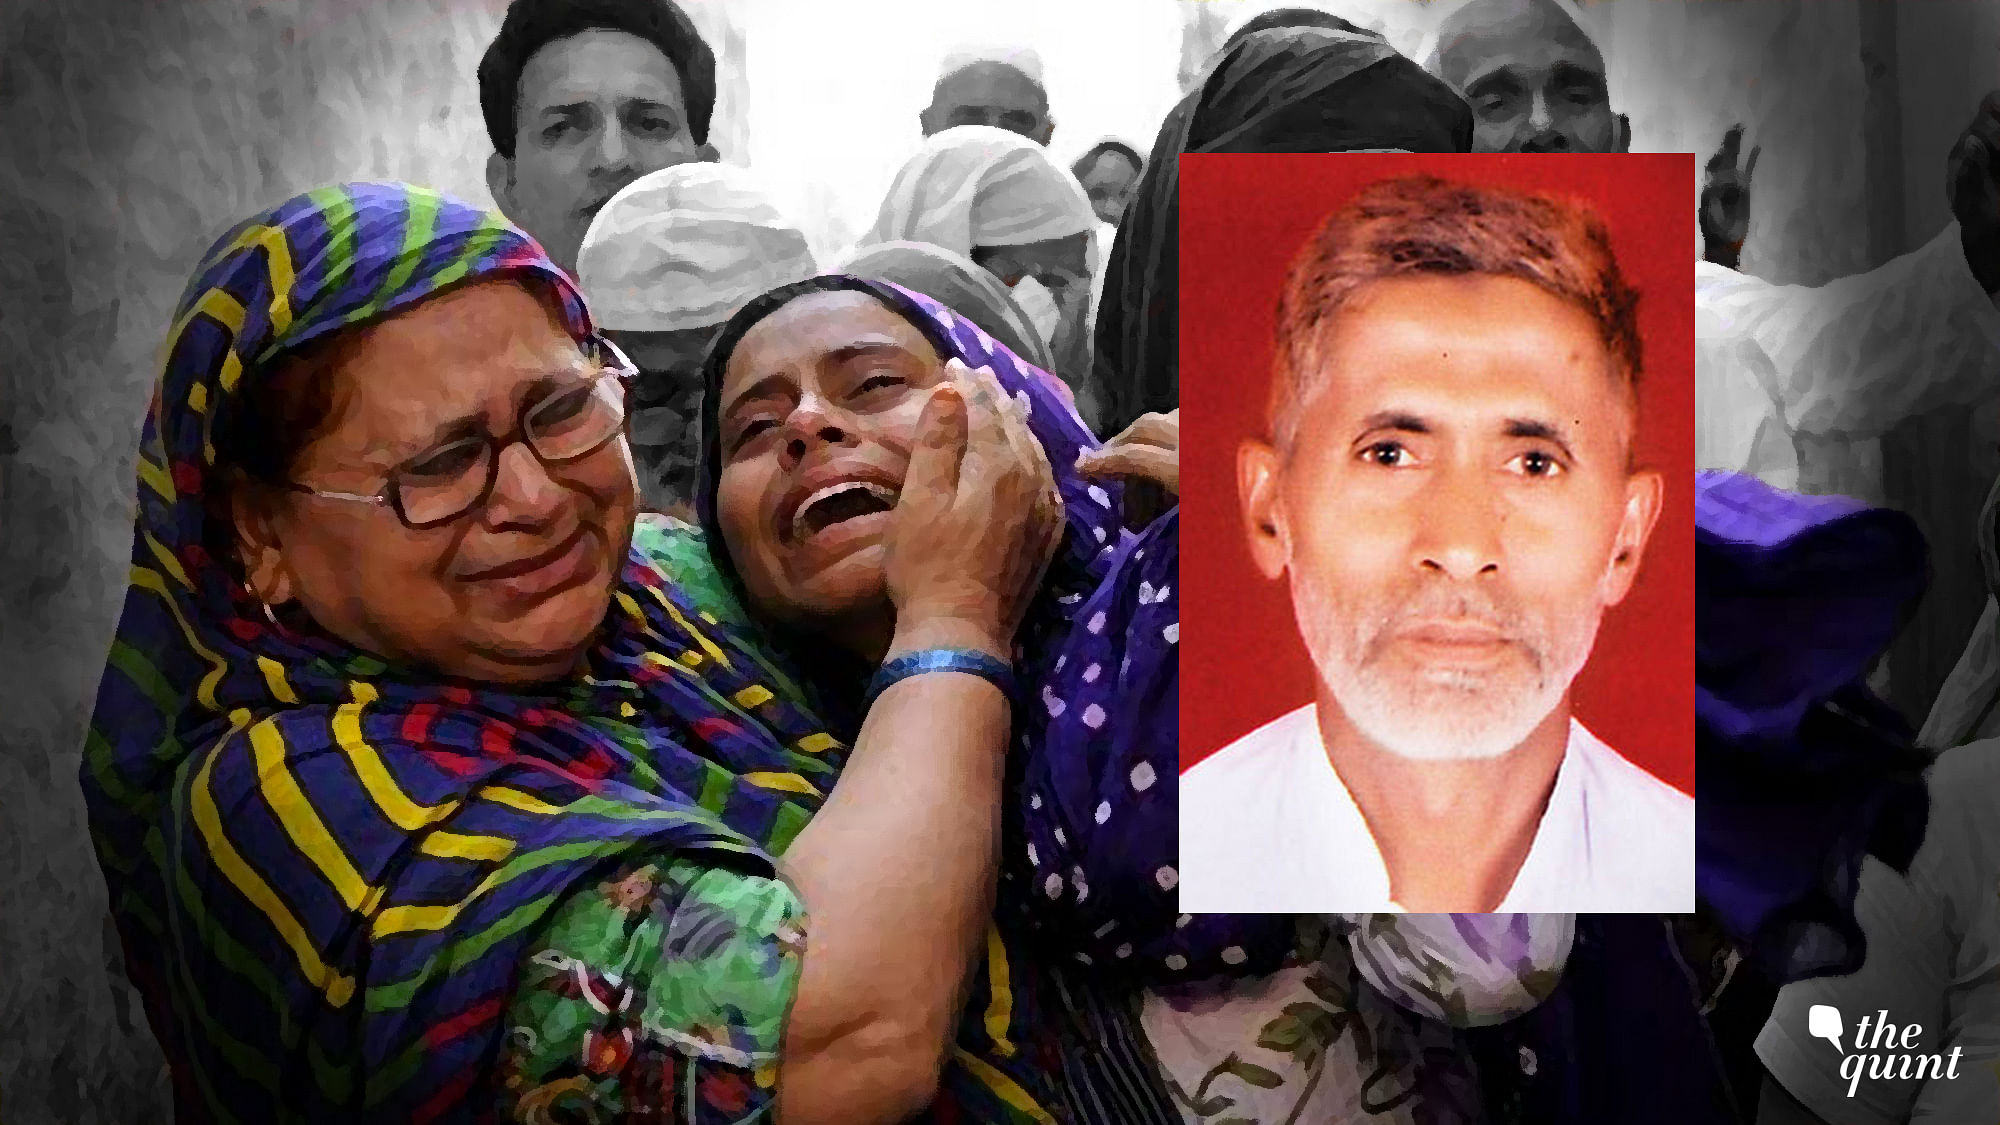 51-year-old Akhlaq was lynched in Uttar Pradesh’s Dadri district on suspicion of storing beef in his house on 28 September 2015. Five years later, his family waits for the trial in his case to begin.